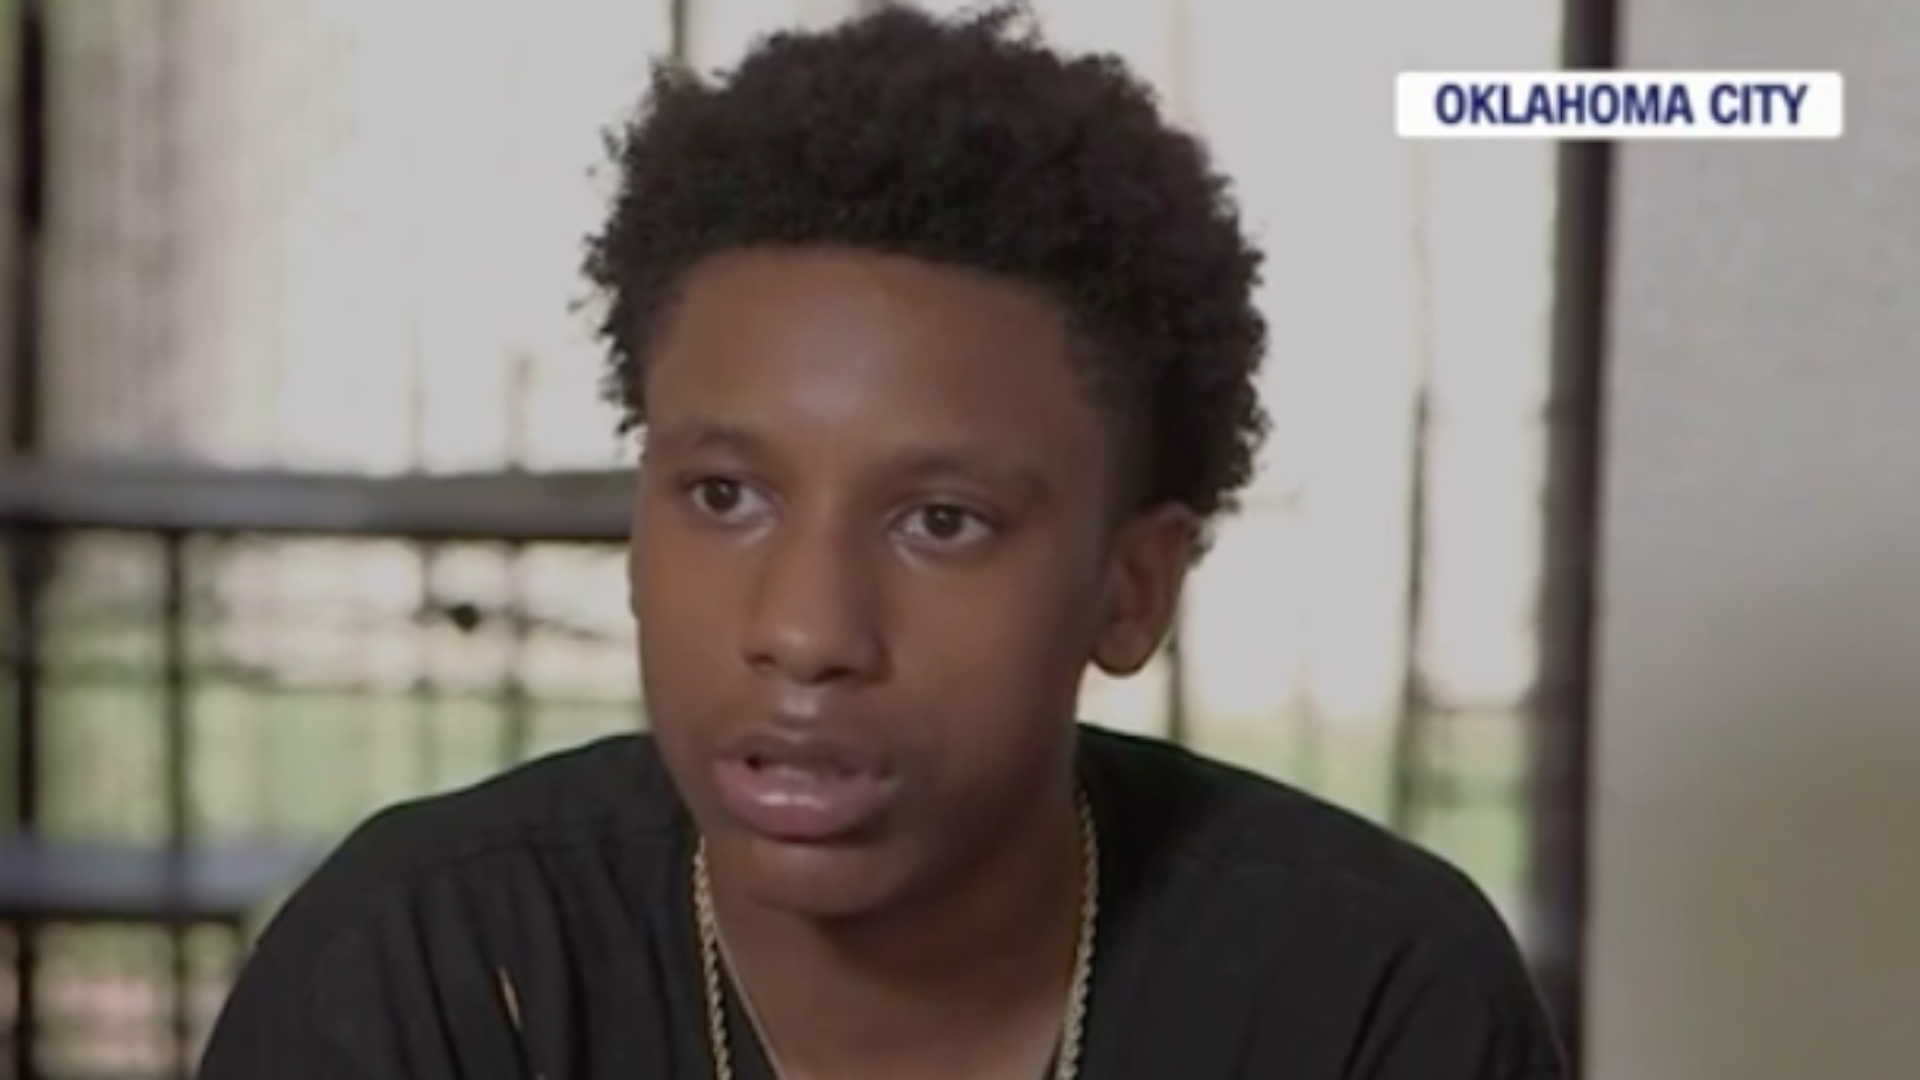 Oklahoma City Cop Shot 14-Year-Old He Claims Had A Gun, Teen Says He Was Unarmed, Wasn't Given Time To Respond